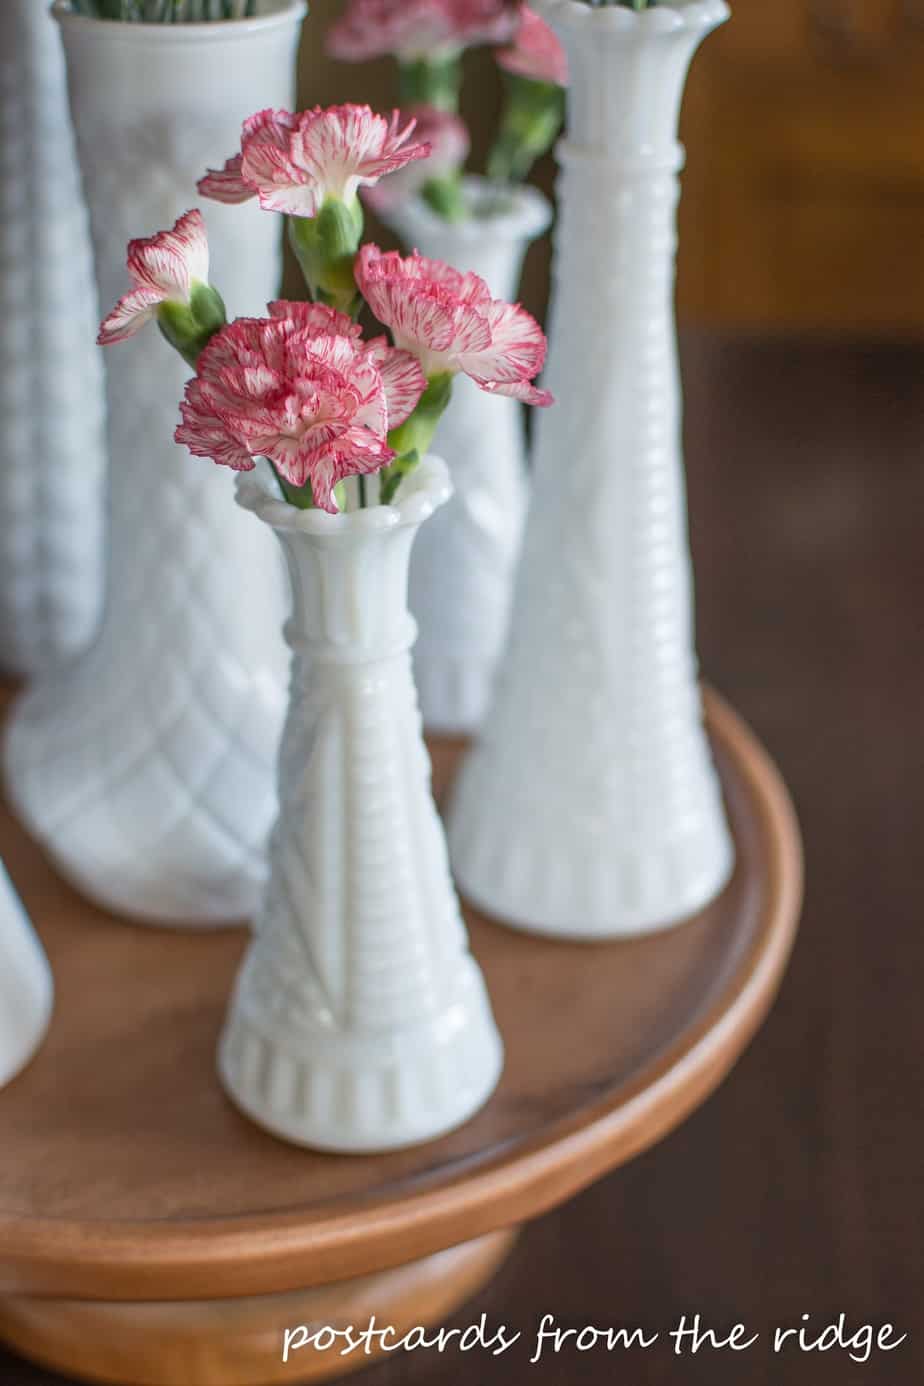 Such a sweet little milk glass vase with carnations. Nice centerpiece.